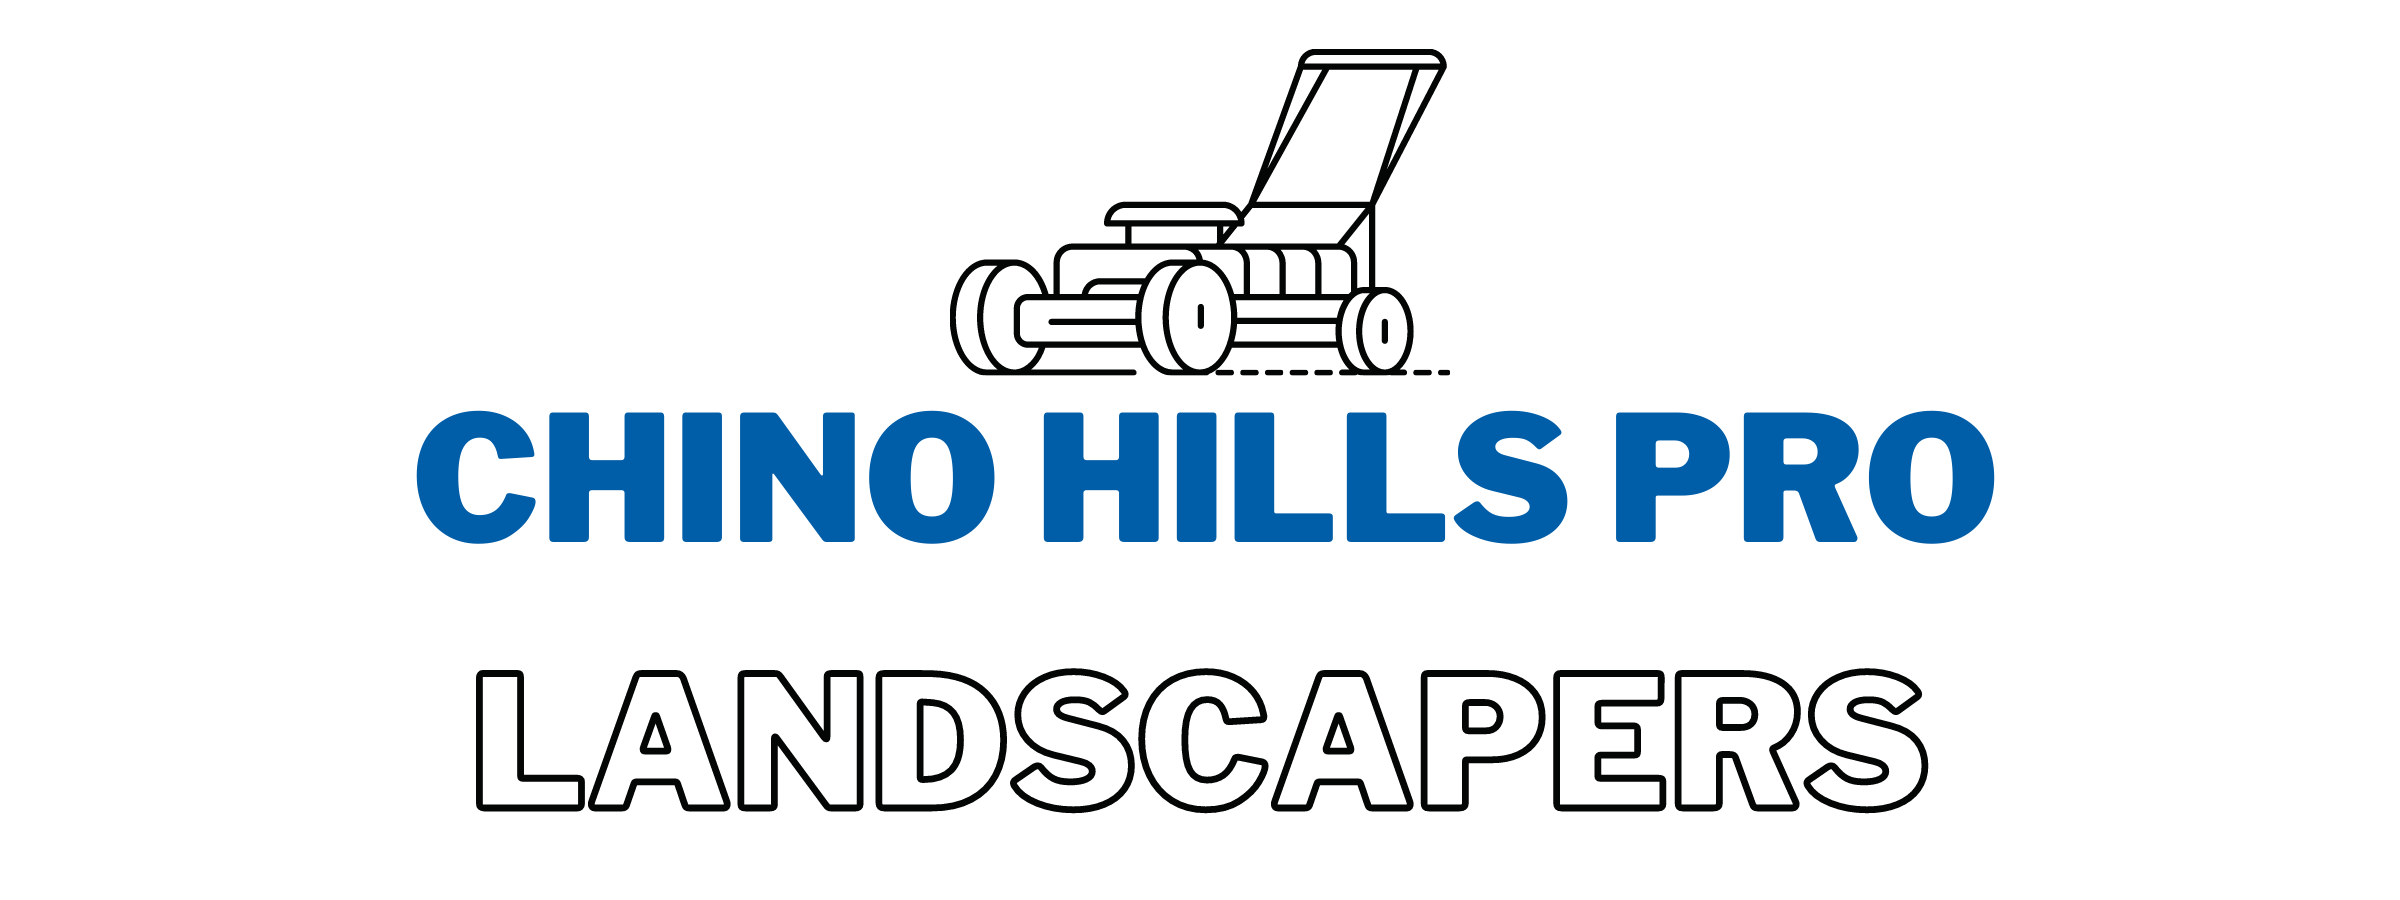 this image shows chino hills landsapers